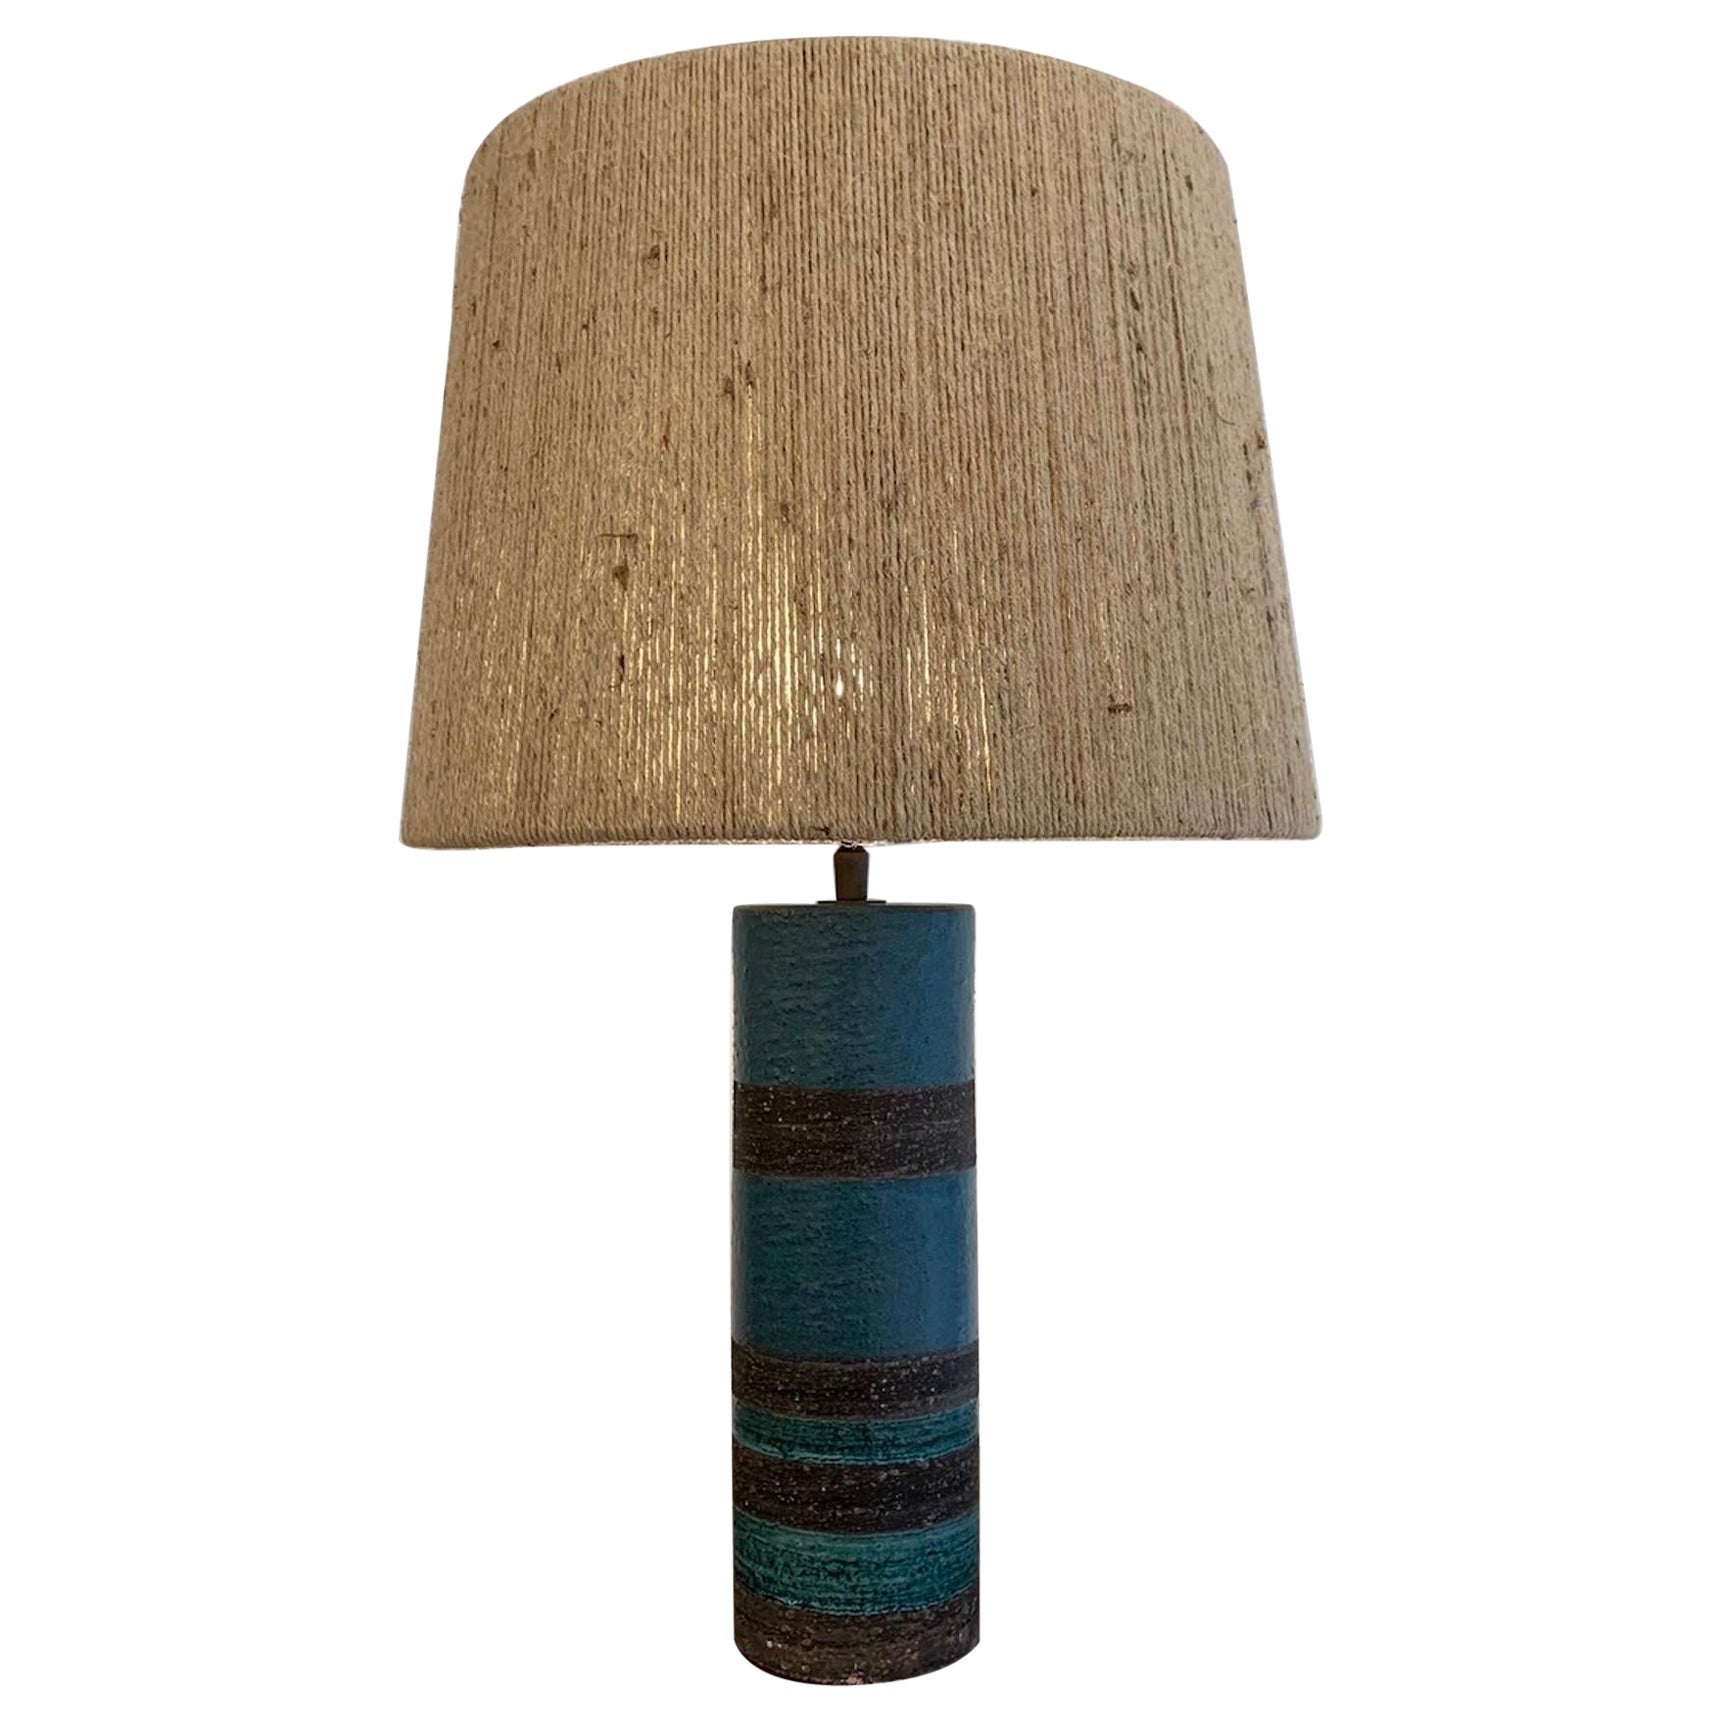 Mid-Century Modern Blue Ceramic Table Lamp by Bitossi, Italy, 1960s